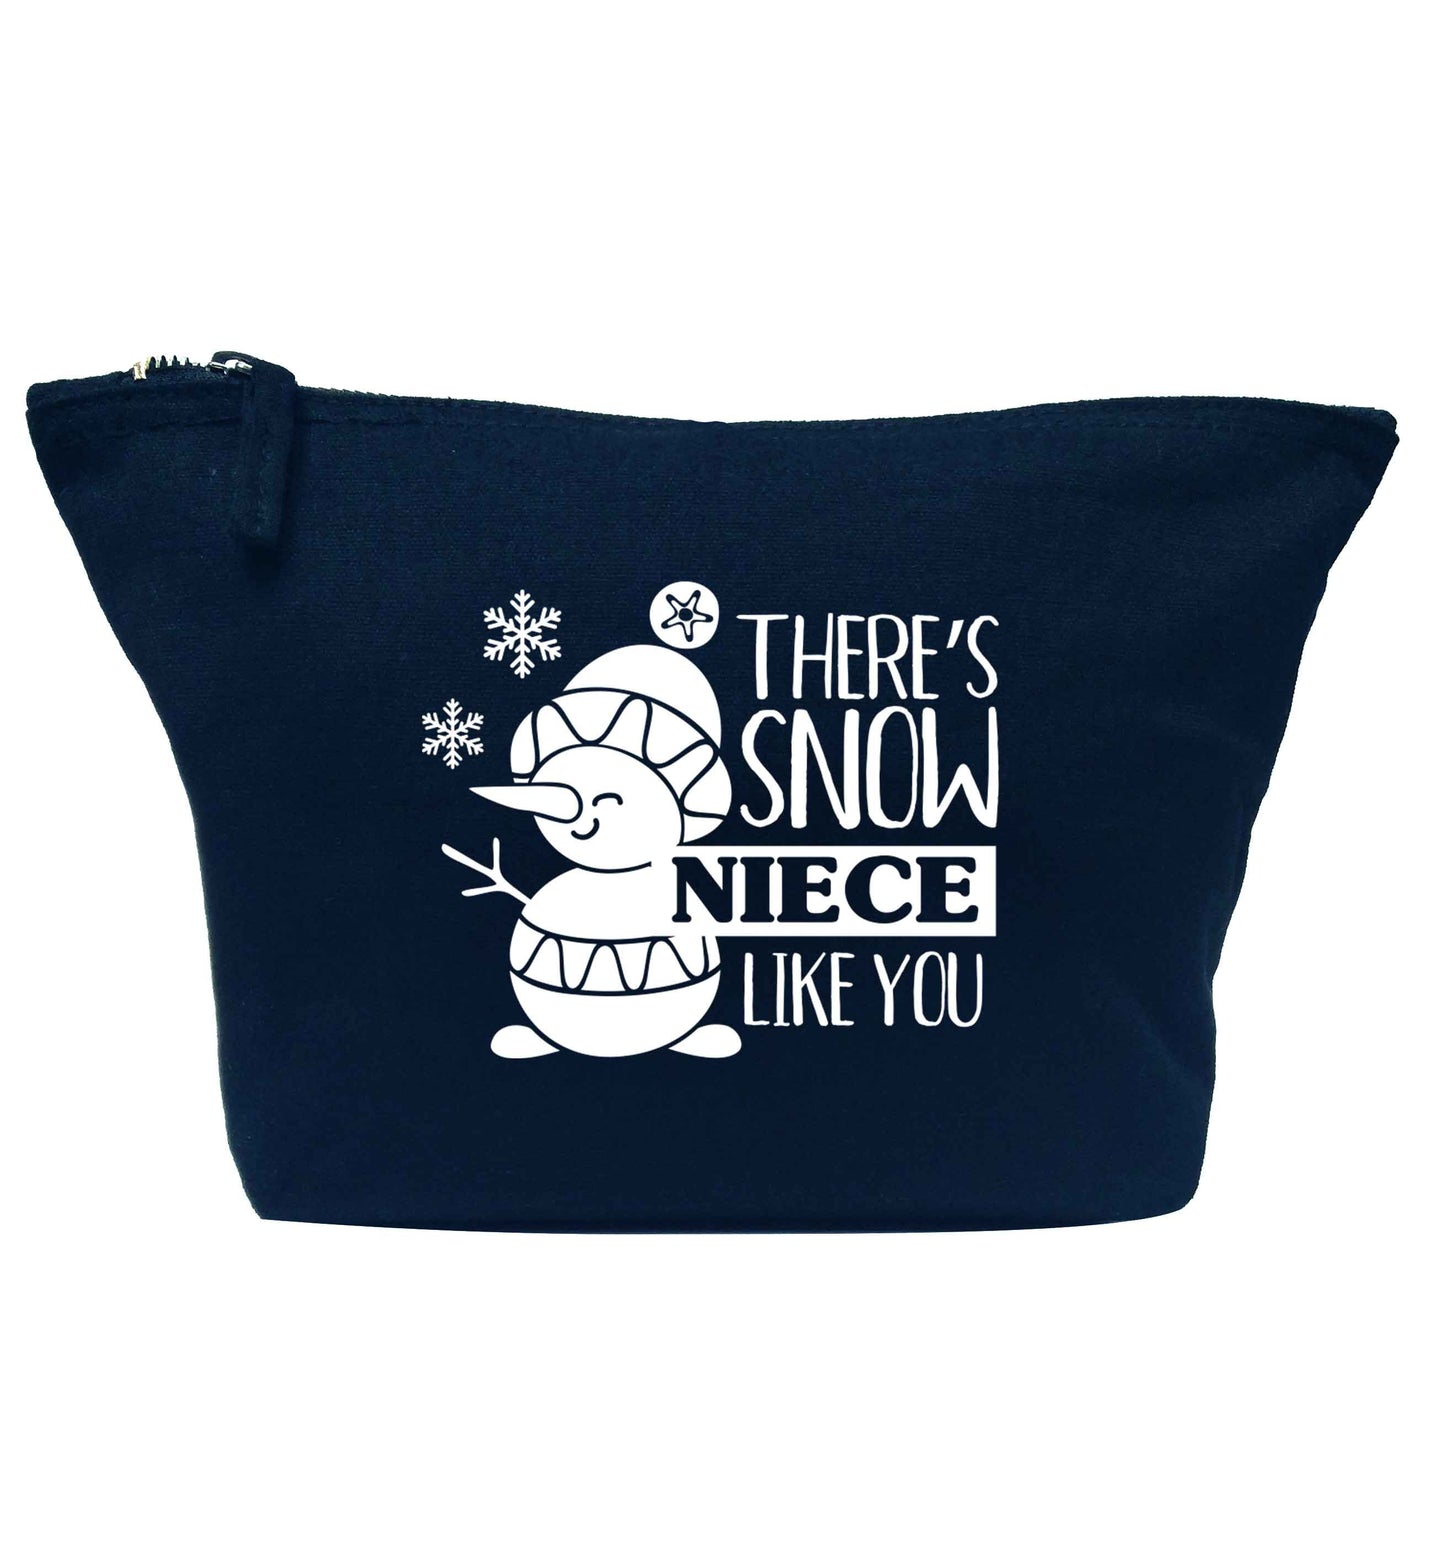 There's snow niece like you navy makeup bag